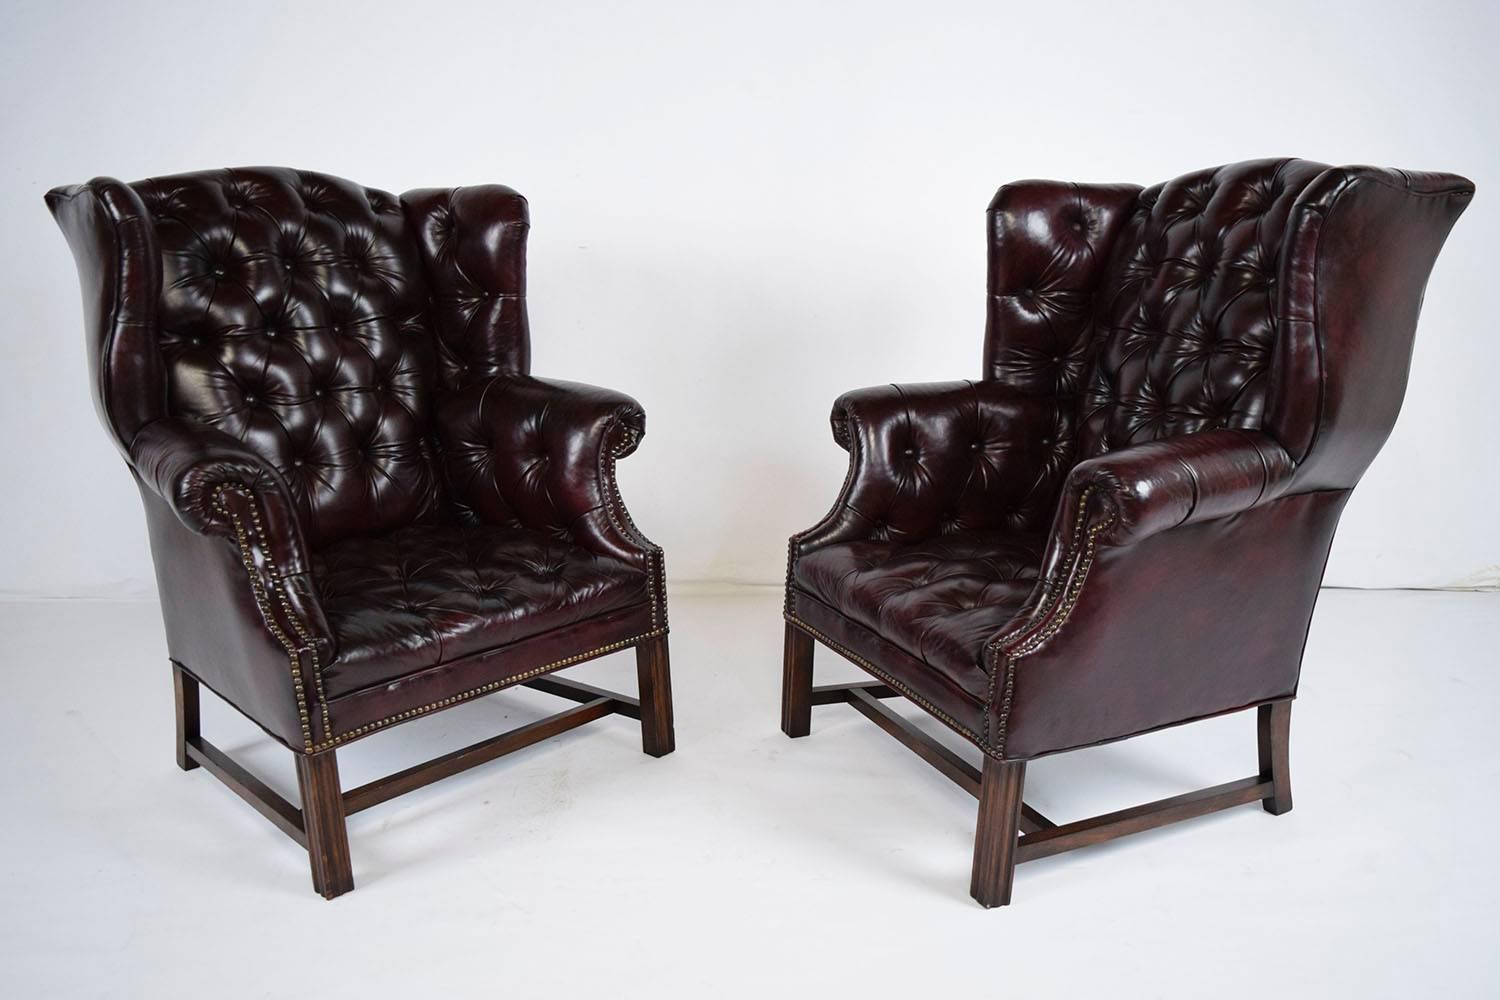 This 1950s vintage pair of Regency-style chesterfield wingback chairs feature their original leather upholstery. The chairs are elegantly adorned with tufted upholstery details on the seats, chair back, and arms. The edges feature nailhead trim